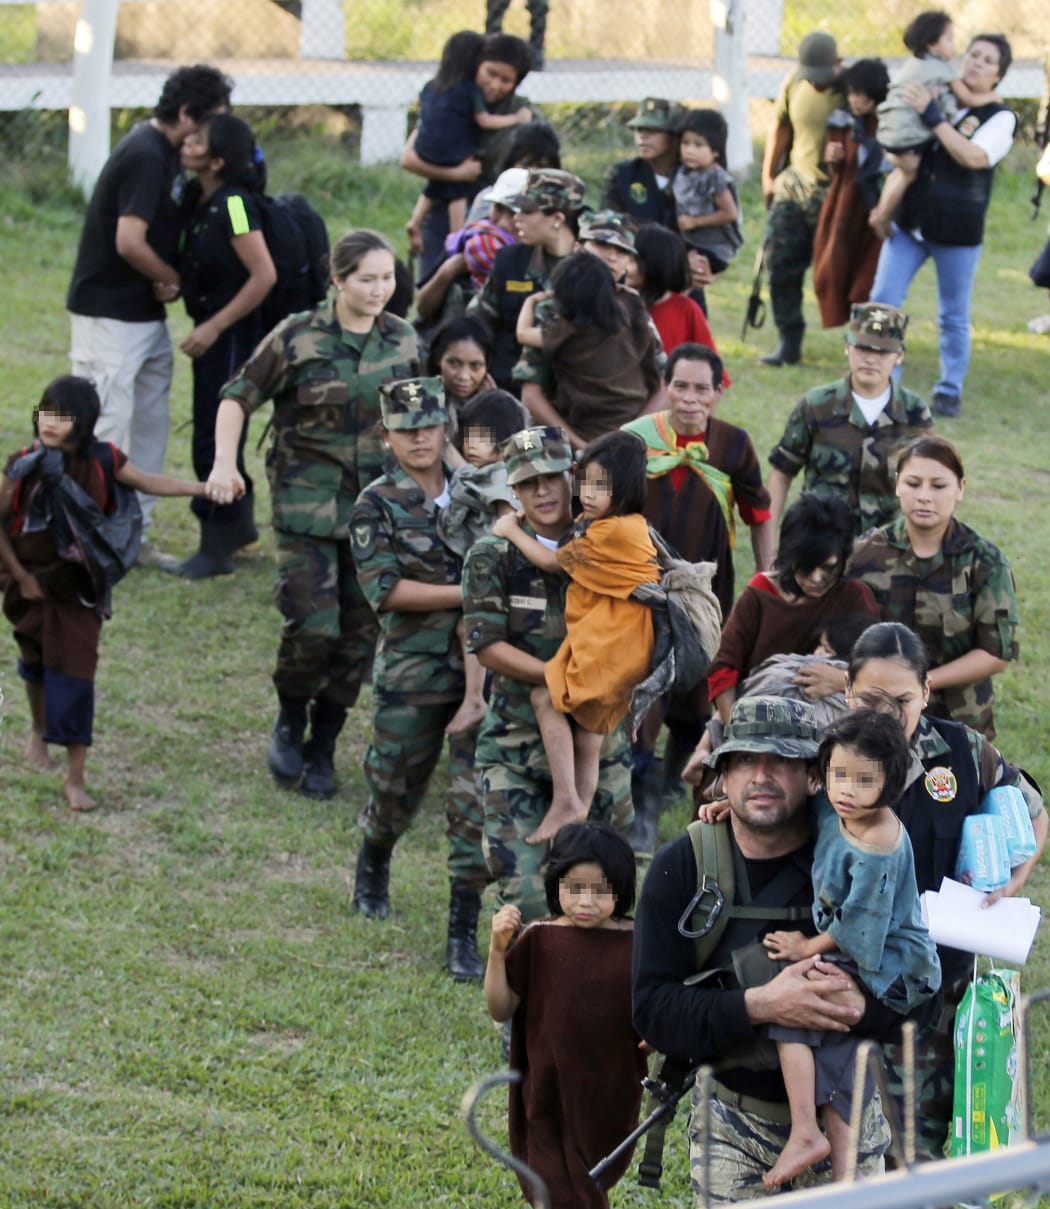 Slaves rescued by Peruvian army